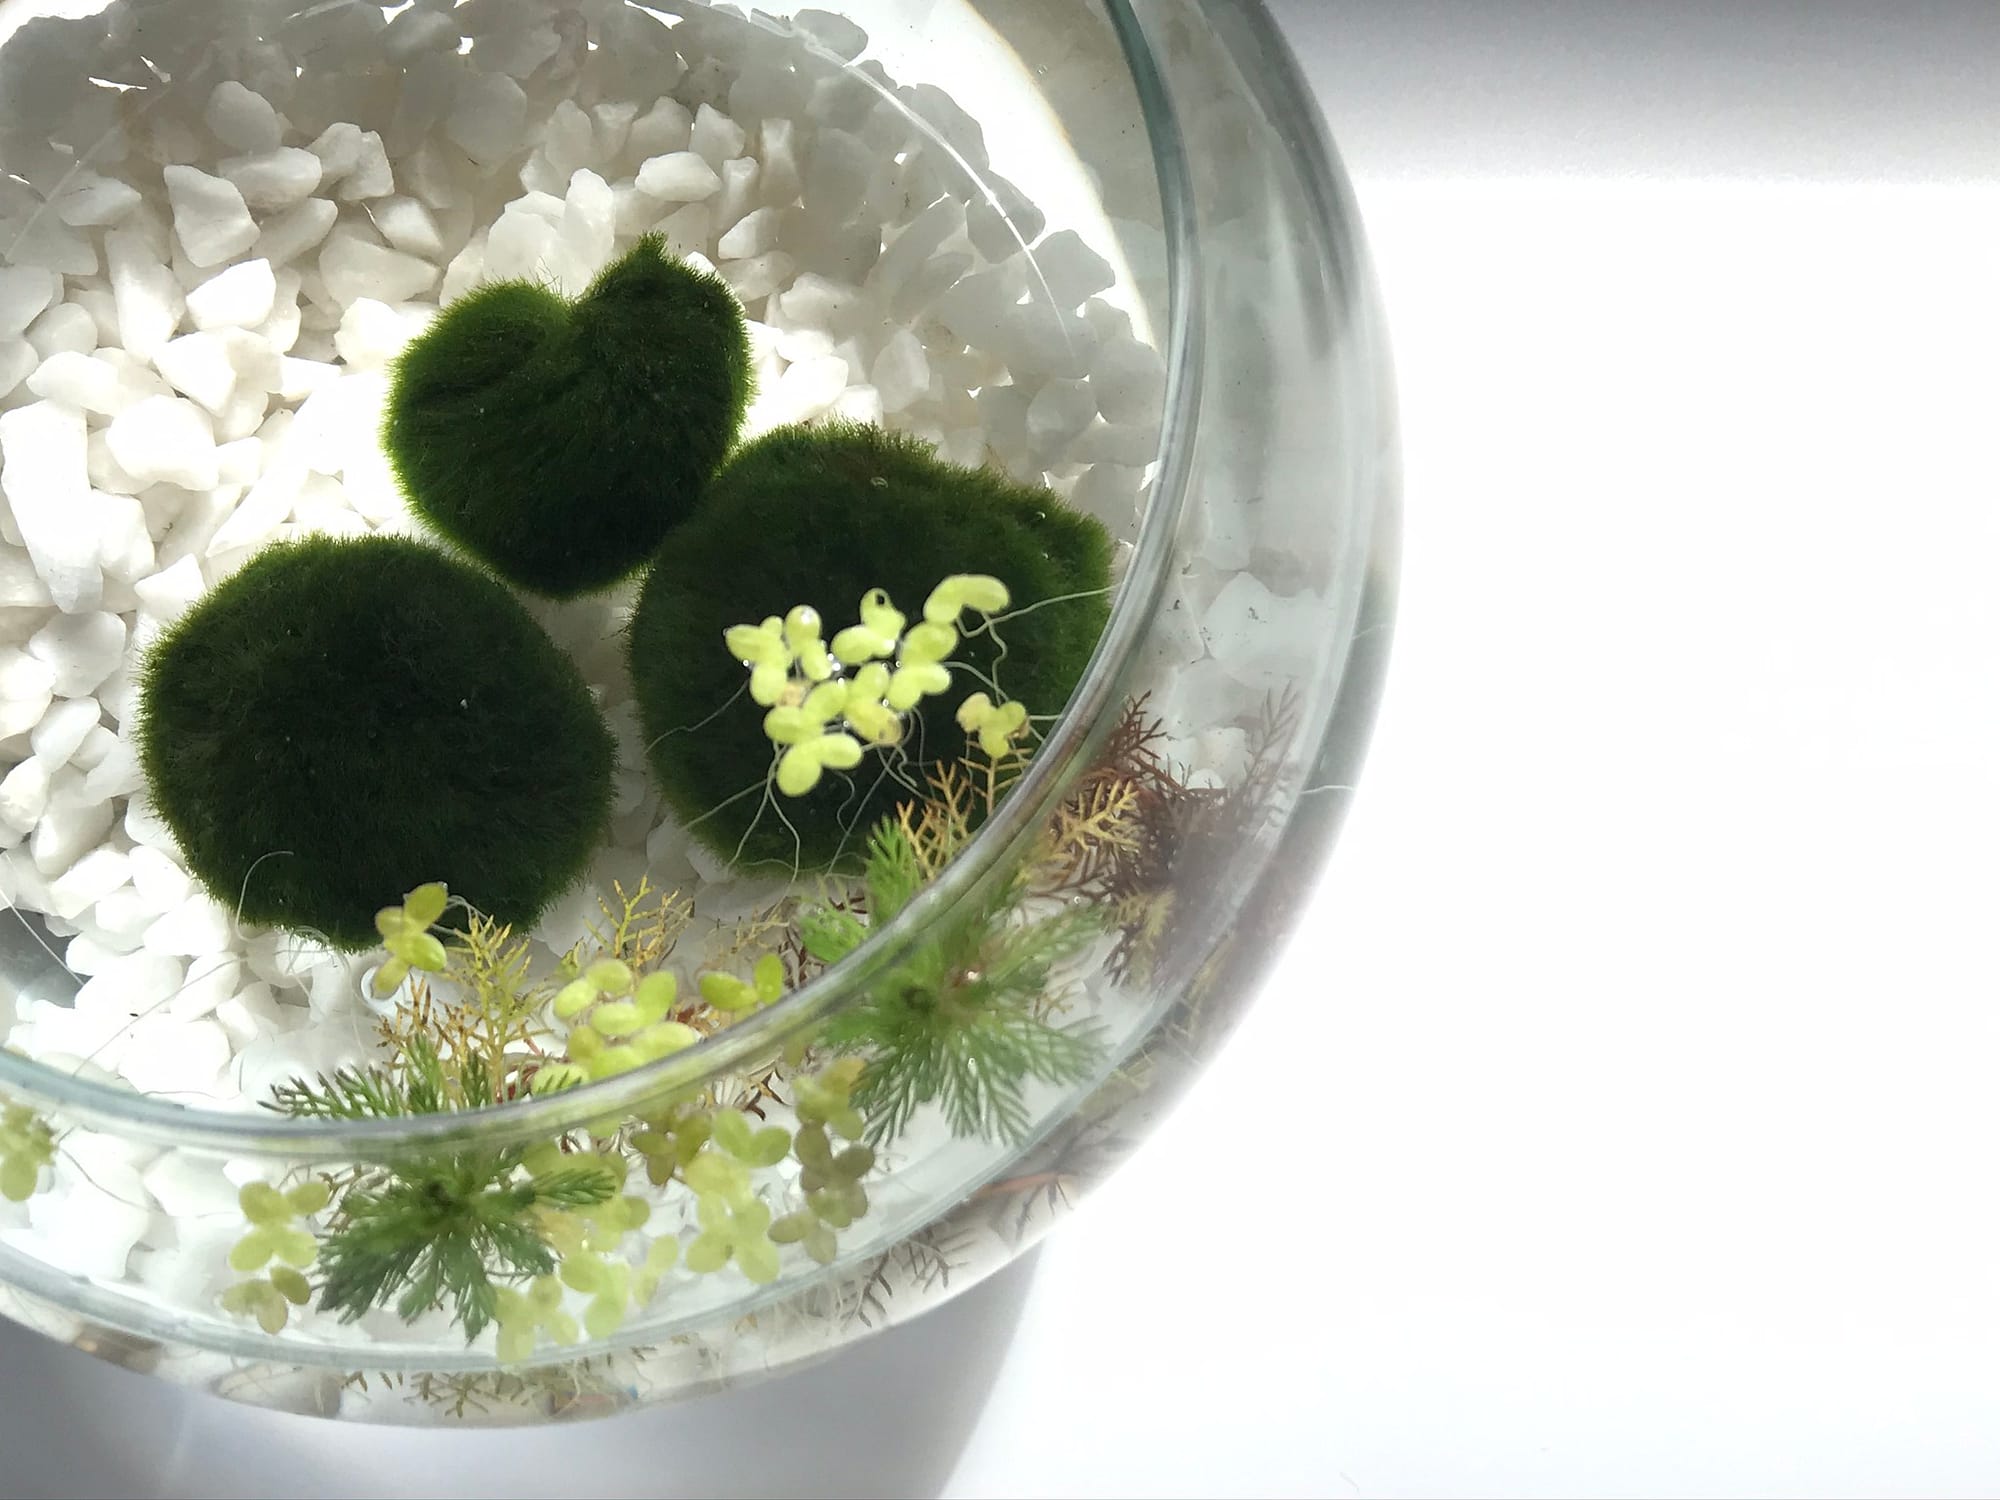 Trio of moss Balls in water bowl on top of white gravel